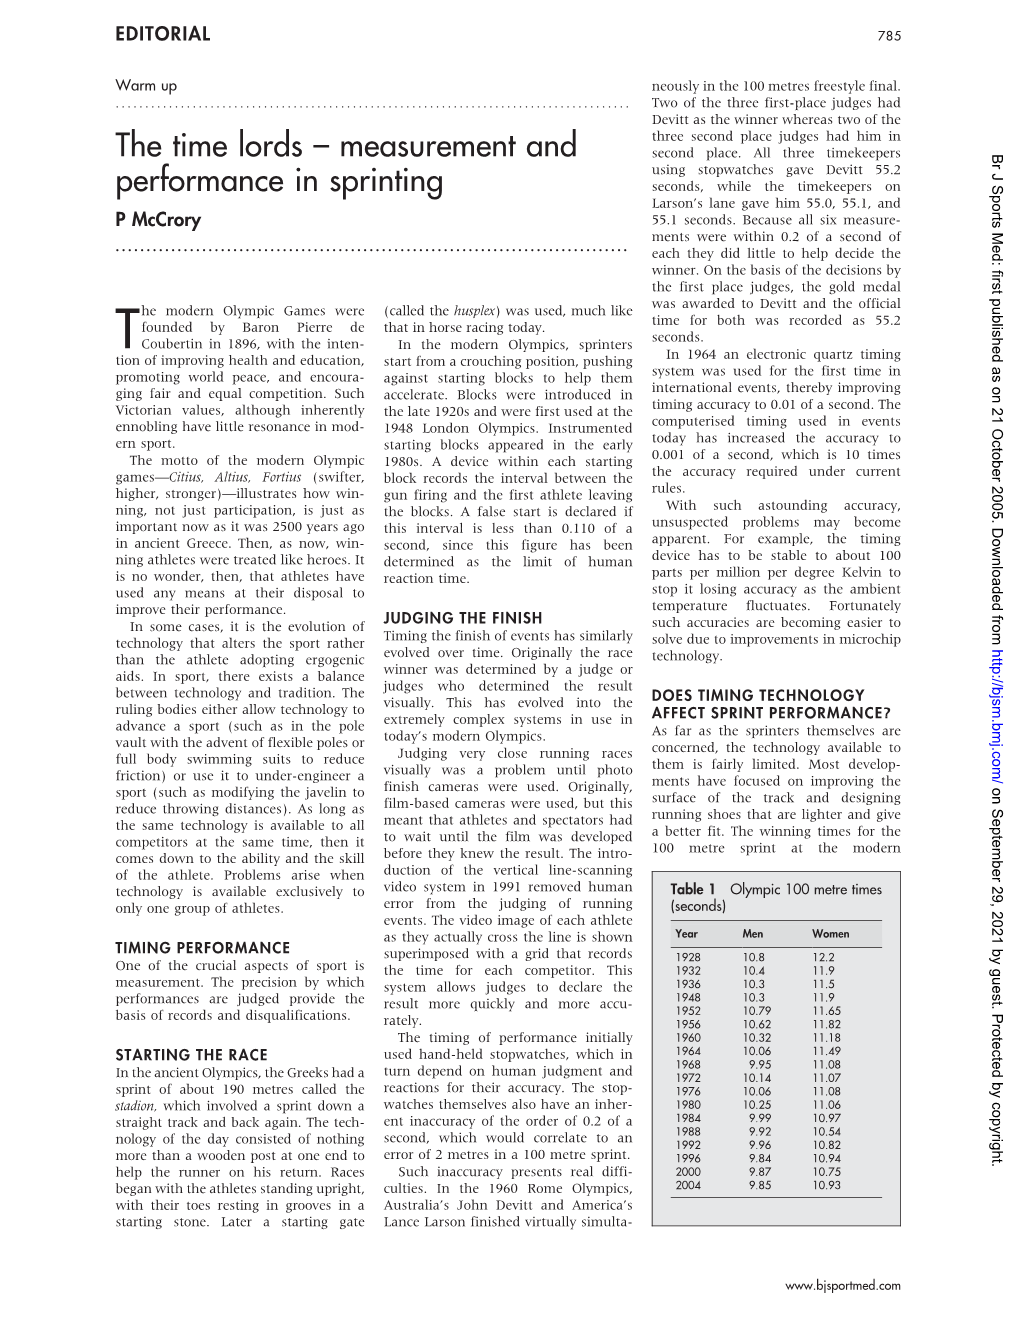 The Time Lords – Measurement and Performance in Sprinting